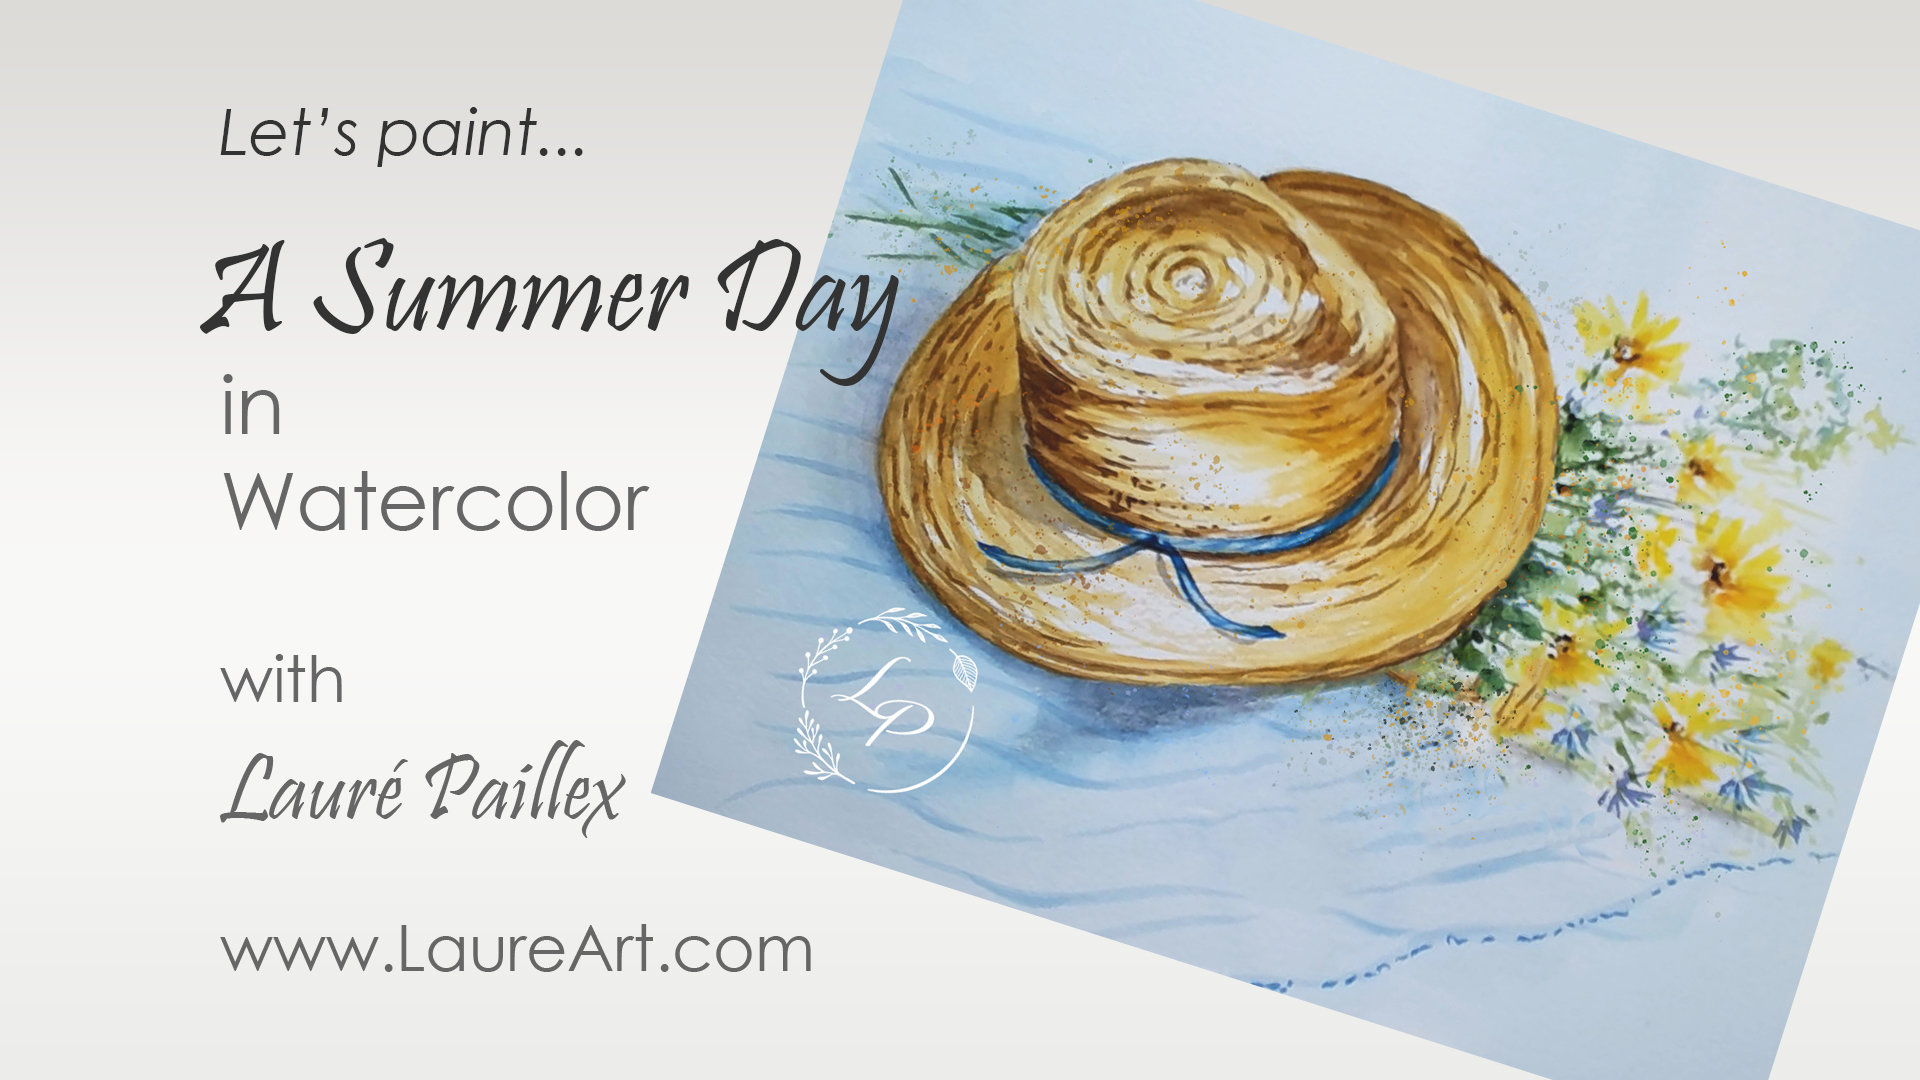 "Summer Day" in Watercolor